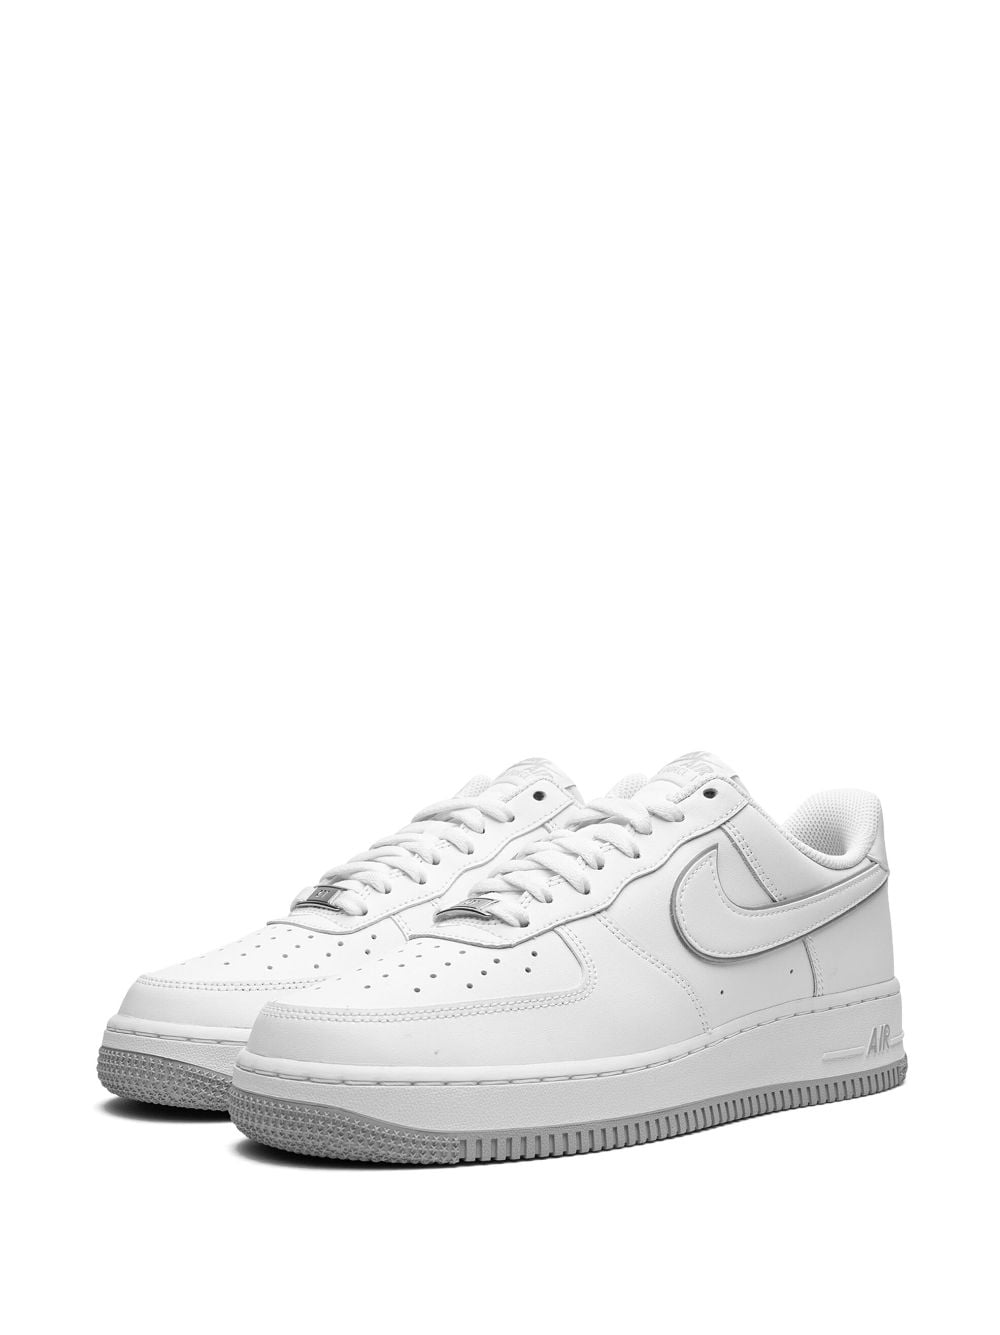 Air Force One WHITE UNC GREY